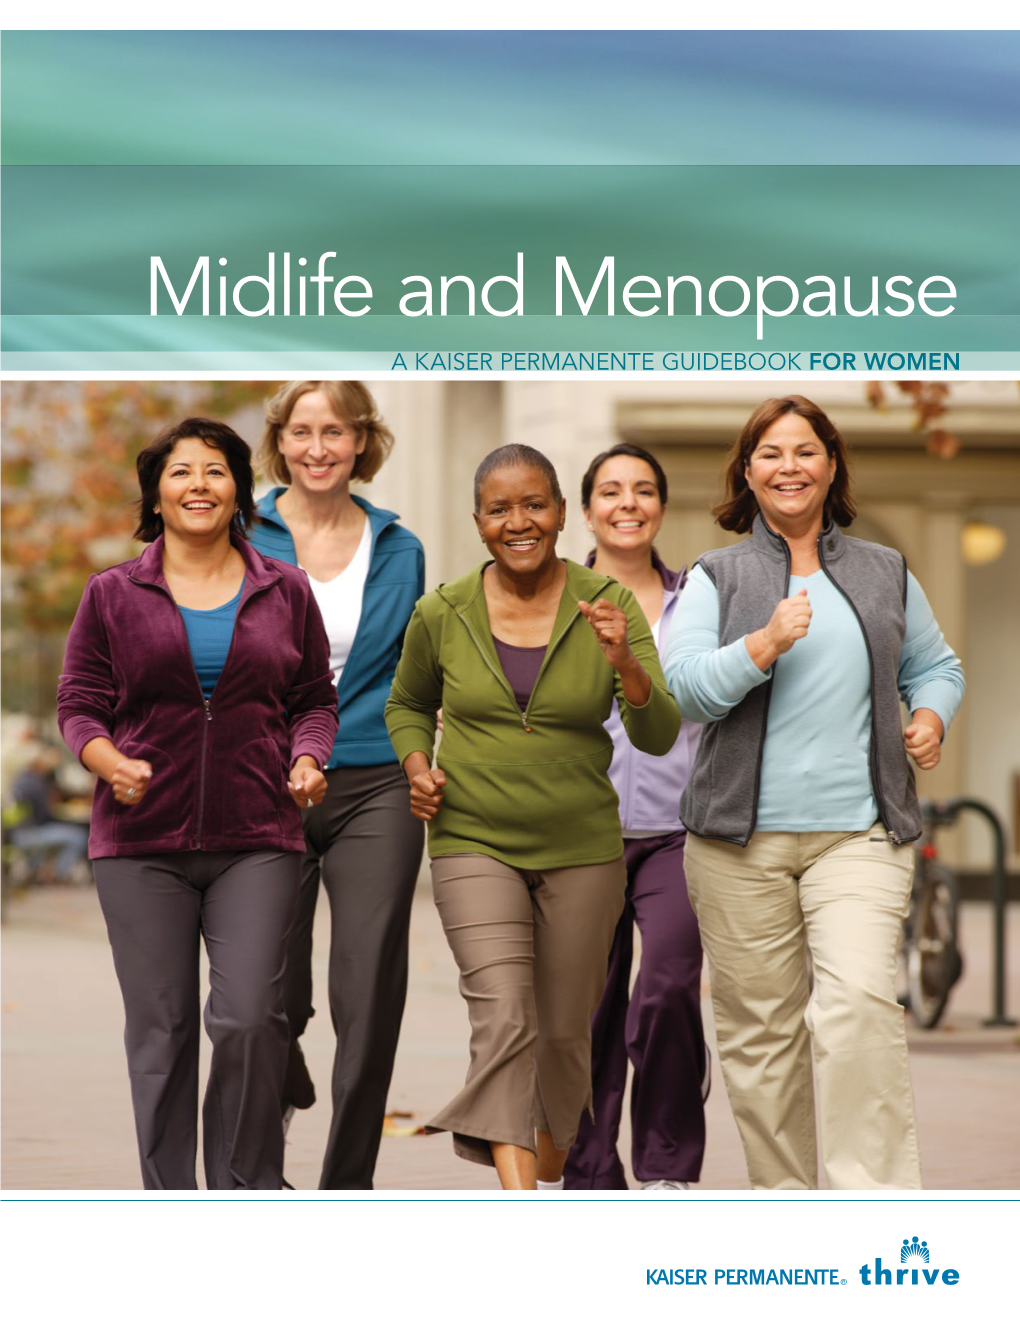 Midlife and Menopause a KAISER PERMANENTE GUIDEBOOK for WOMEN CONTENTS